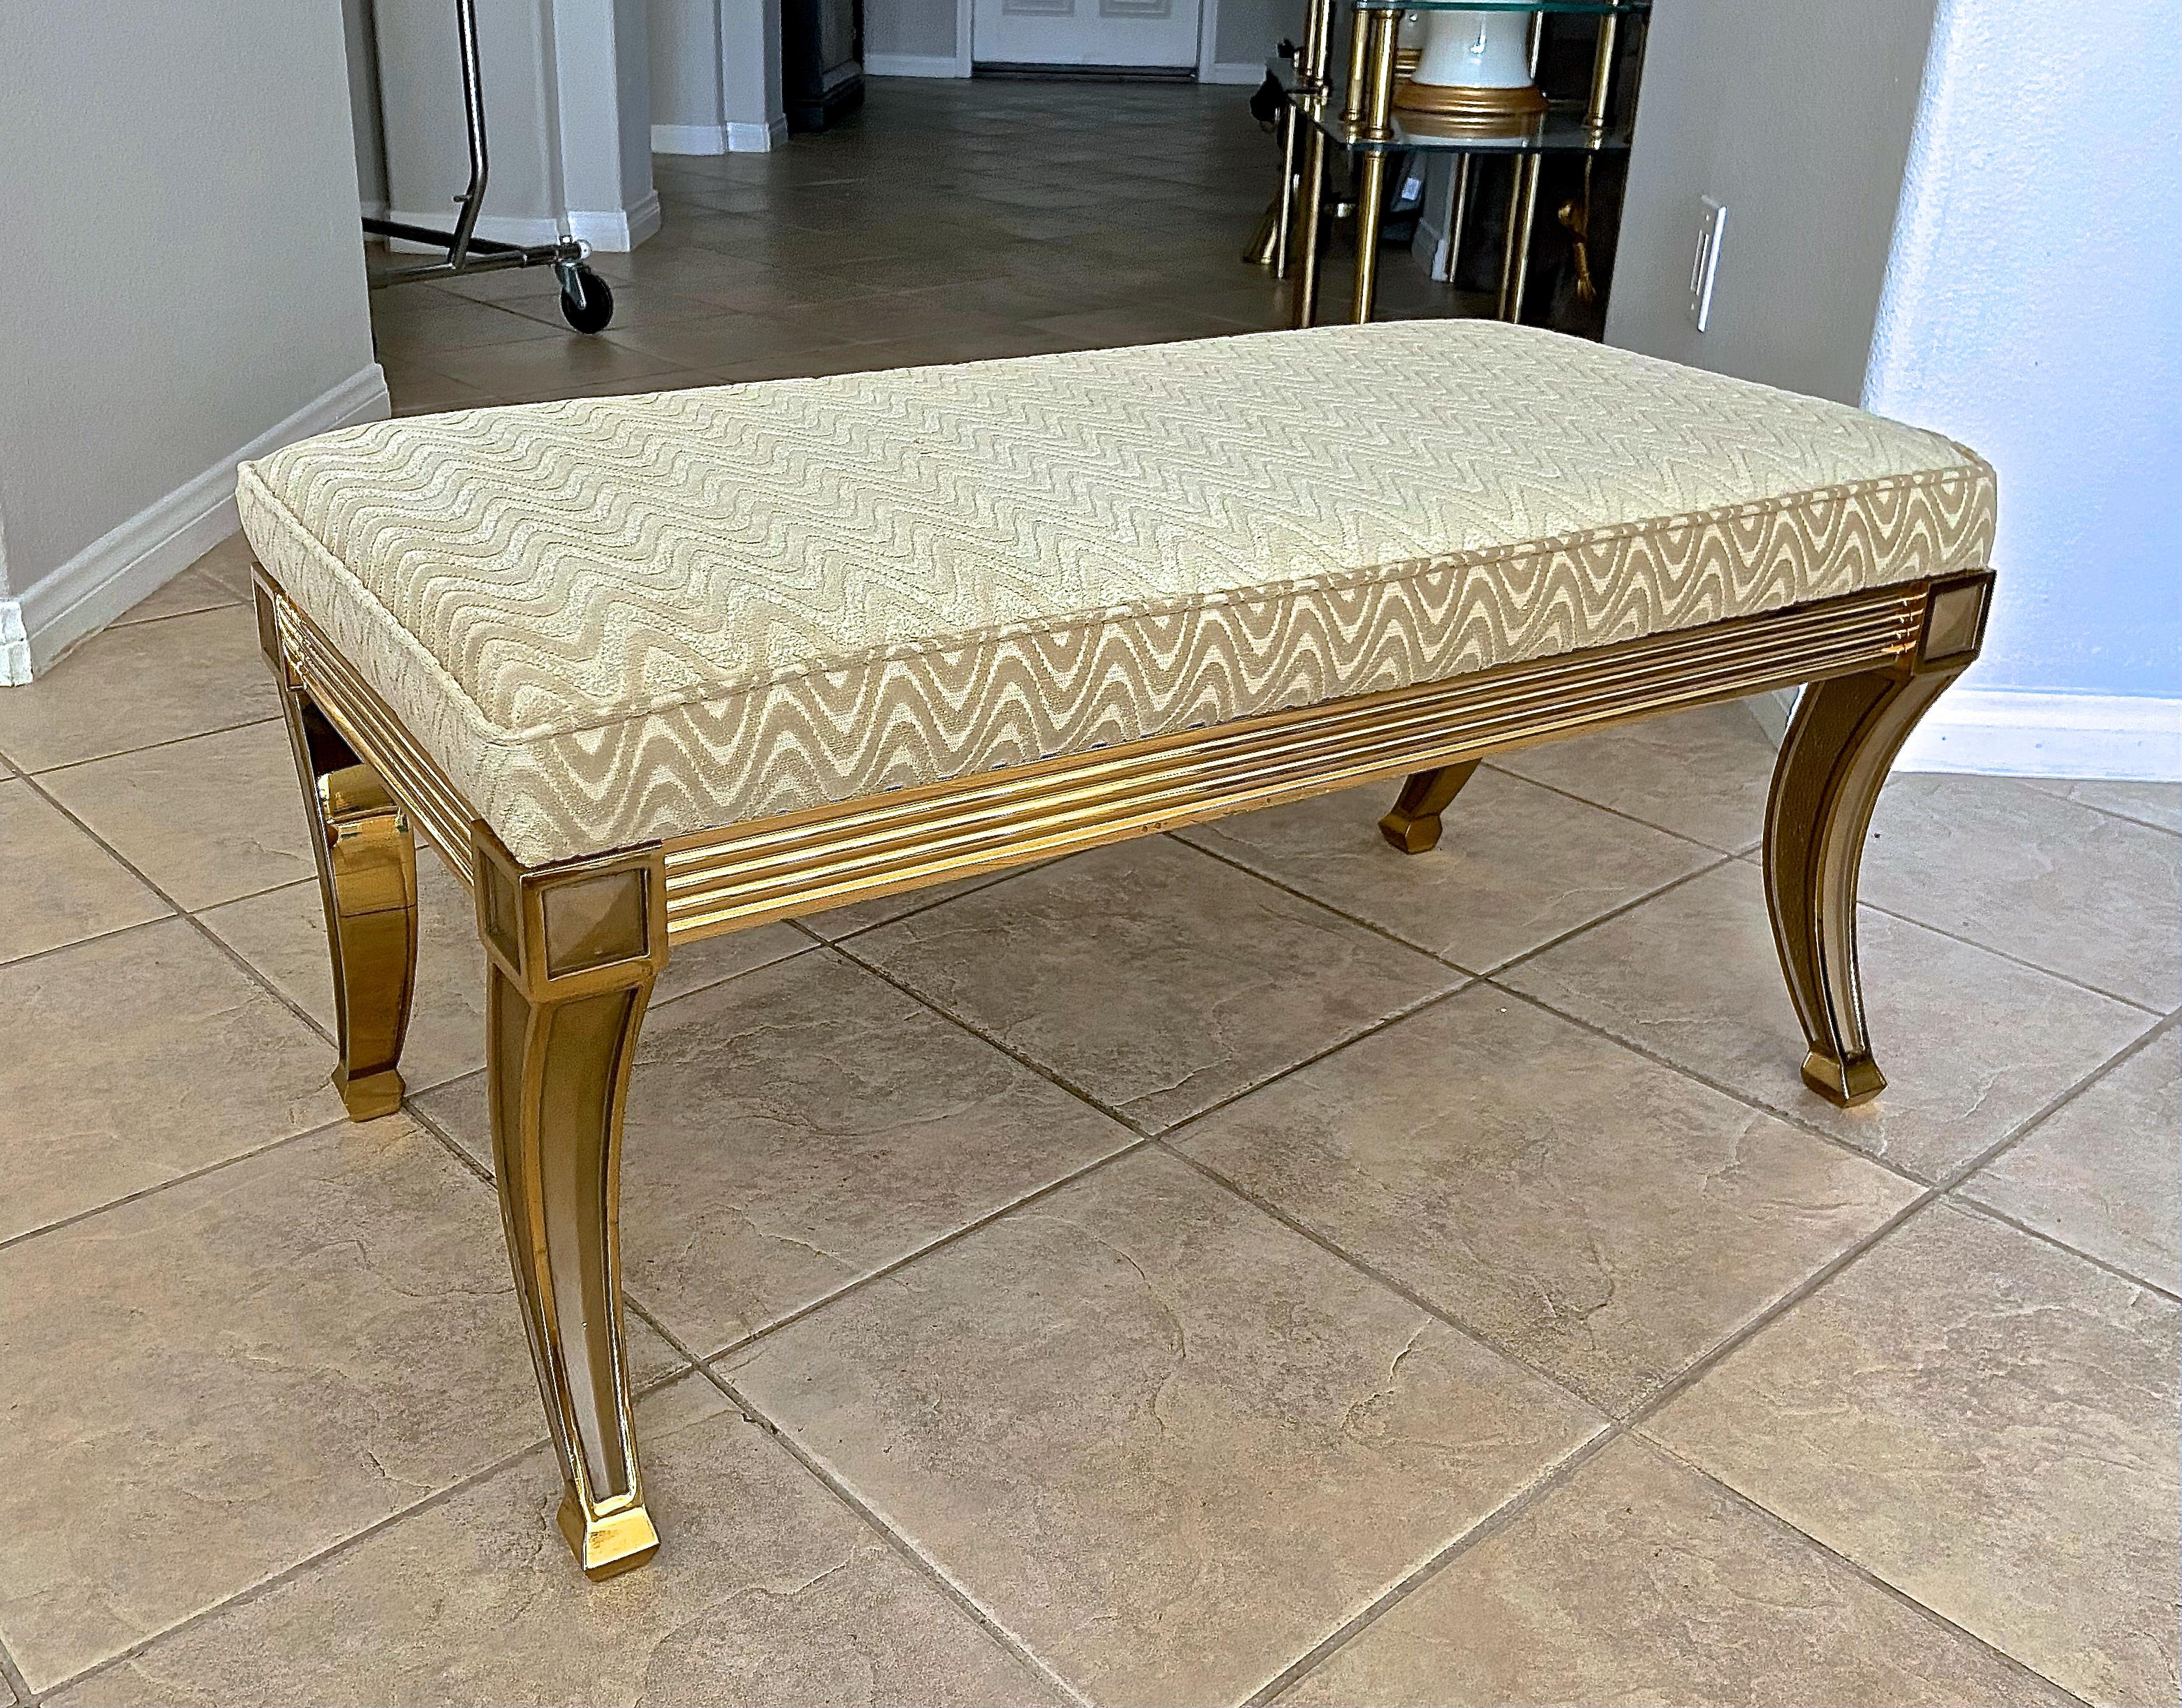 Regency style solid brass saber leg bench. The quality and detailing of the bench are extraordinary. Heavily constructed brass frame weighing over 60 pounds. Newly upholstered in cream zigzag pattern cut velvet fabric.